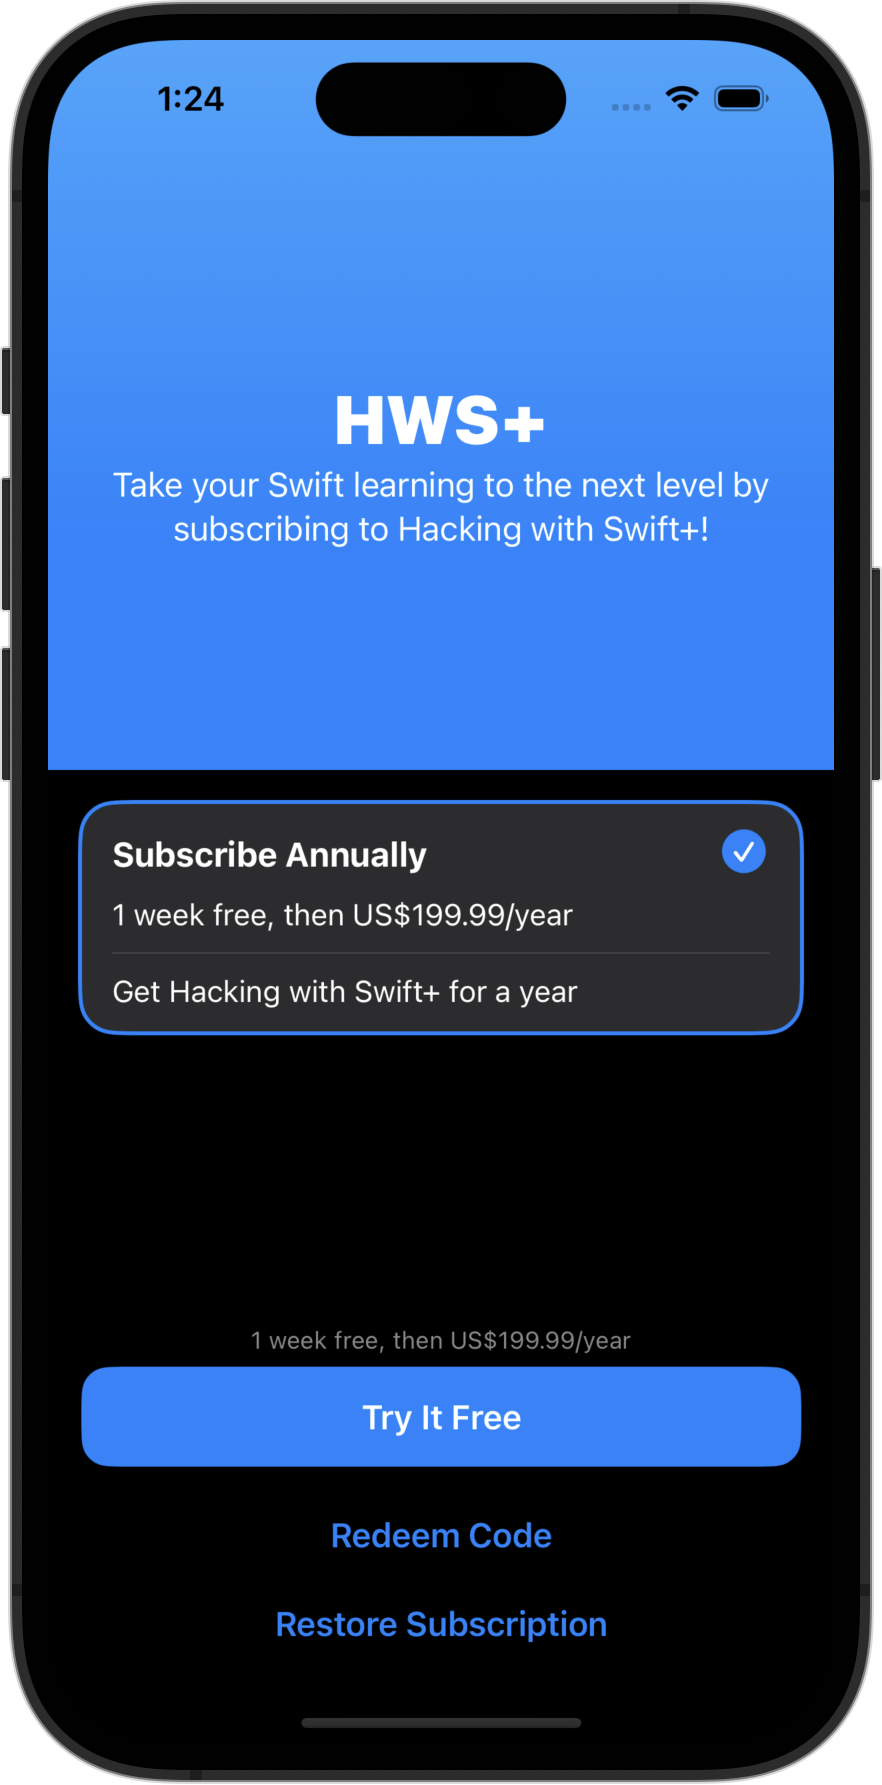 A customized subscription view with custom SwiftUI layout for the marketing header.